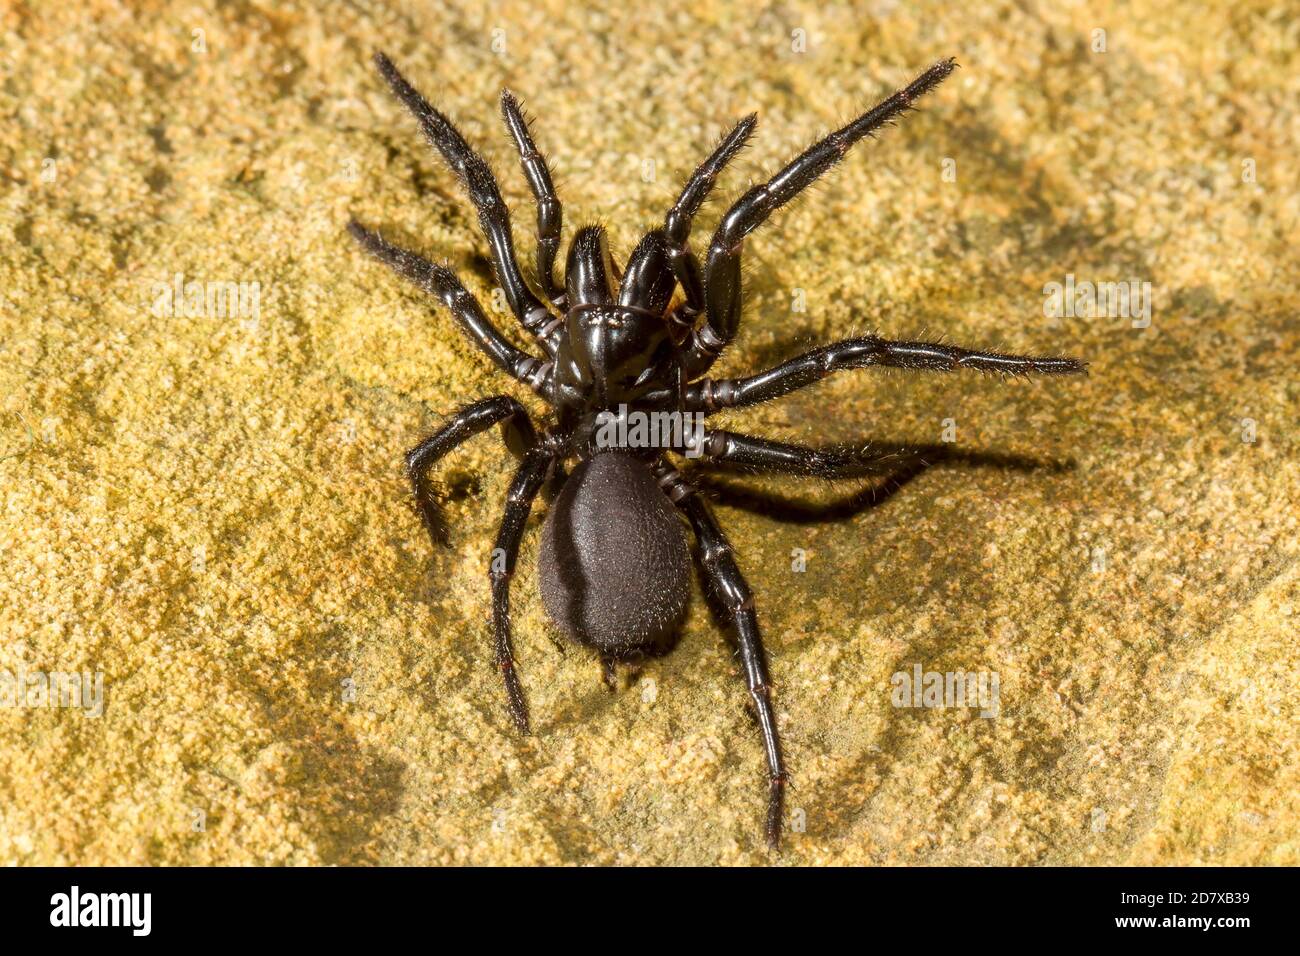 Close up of Sydney Funnel-web Spider Stock Photo